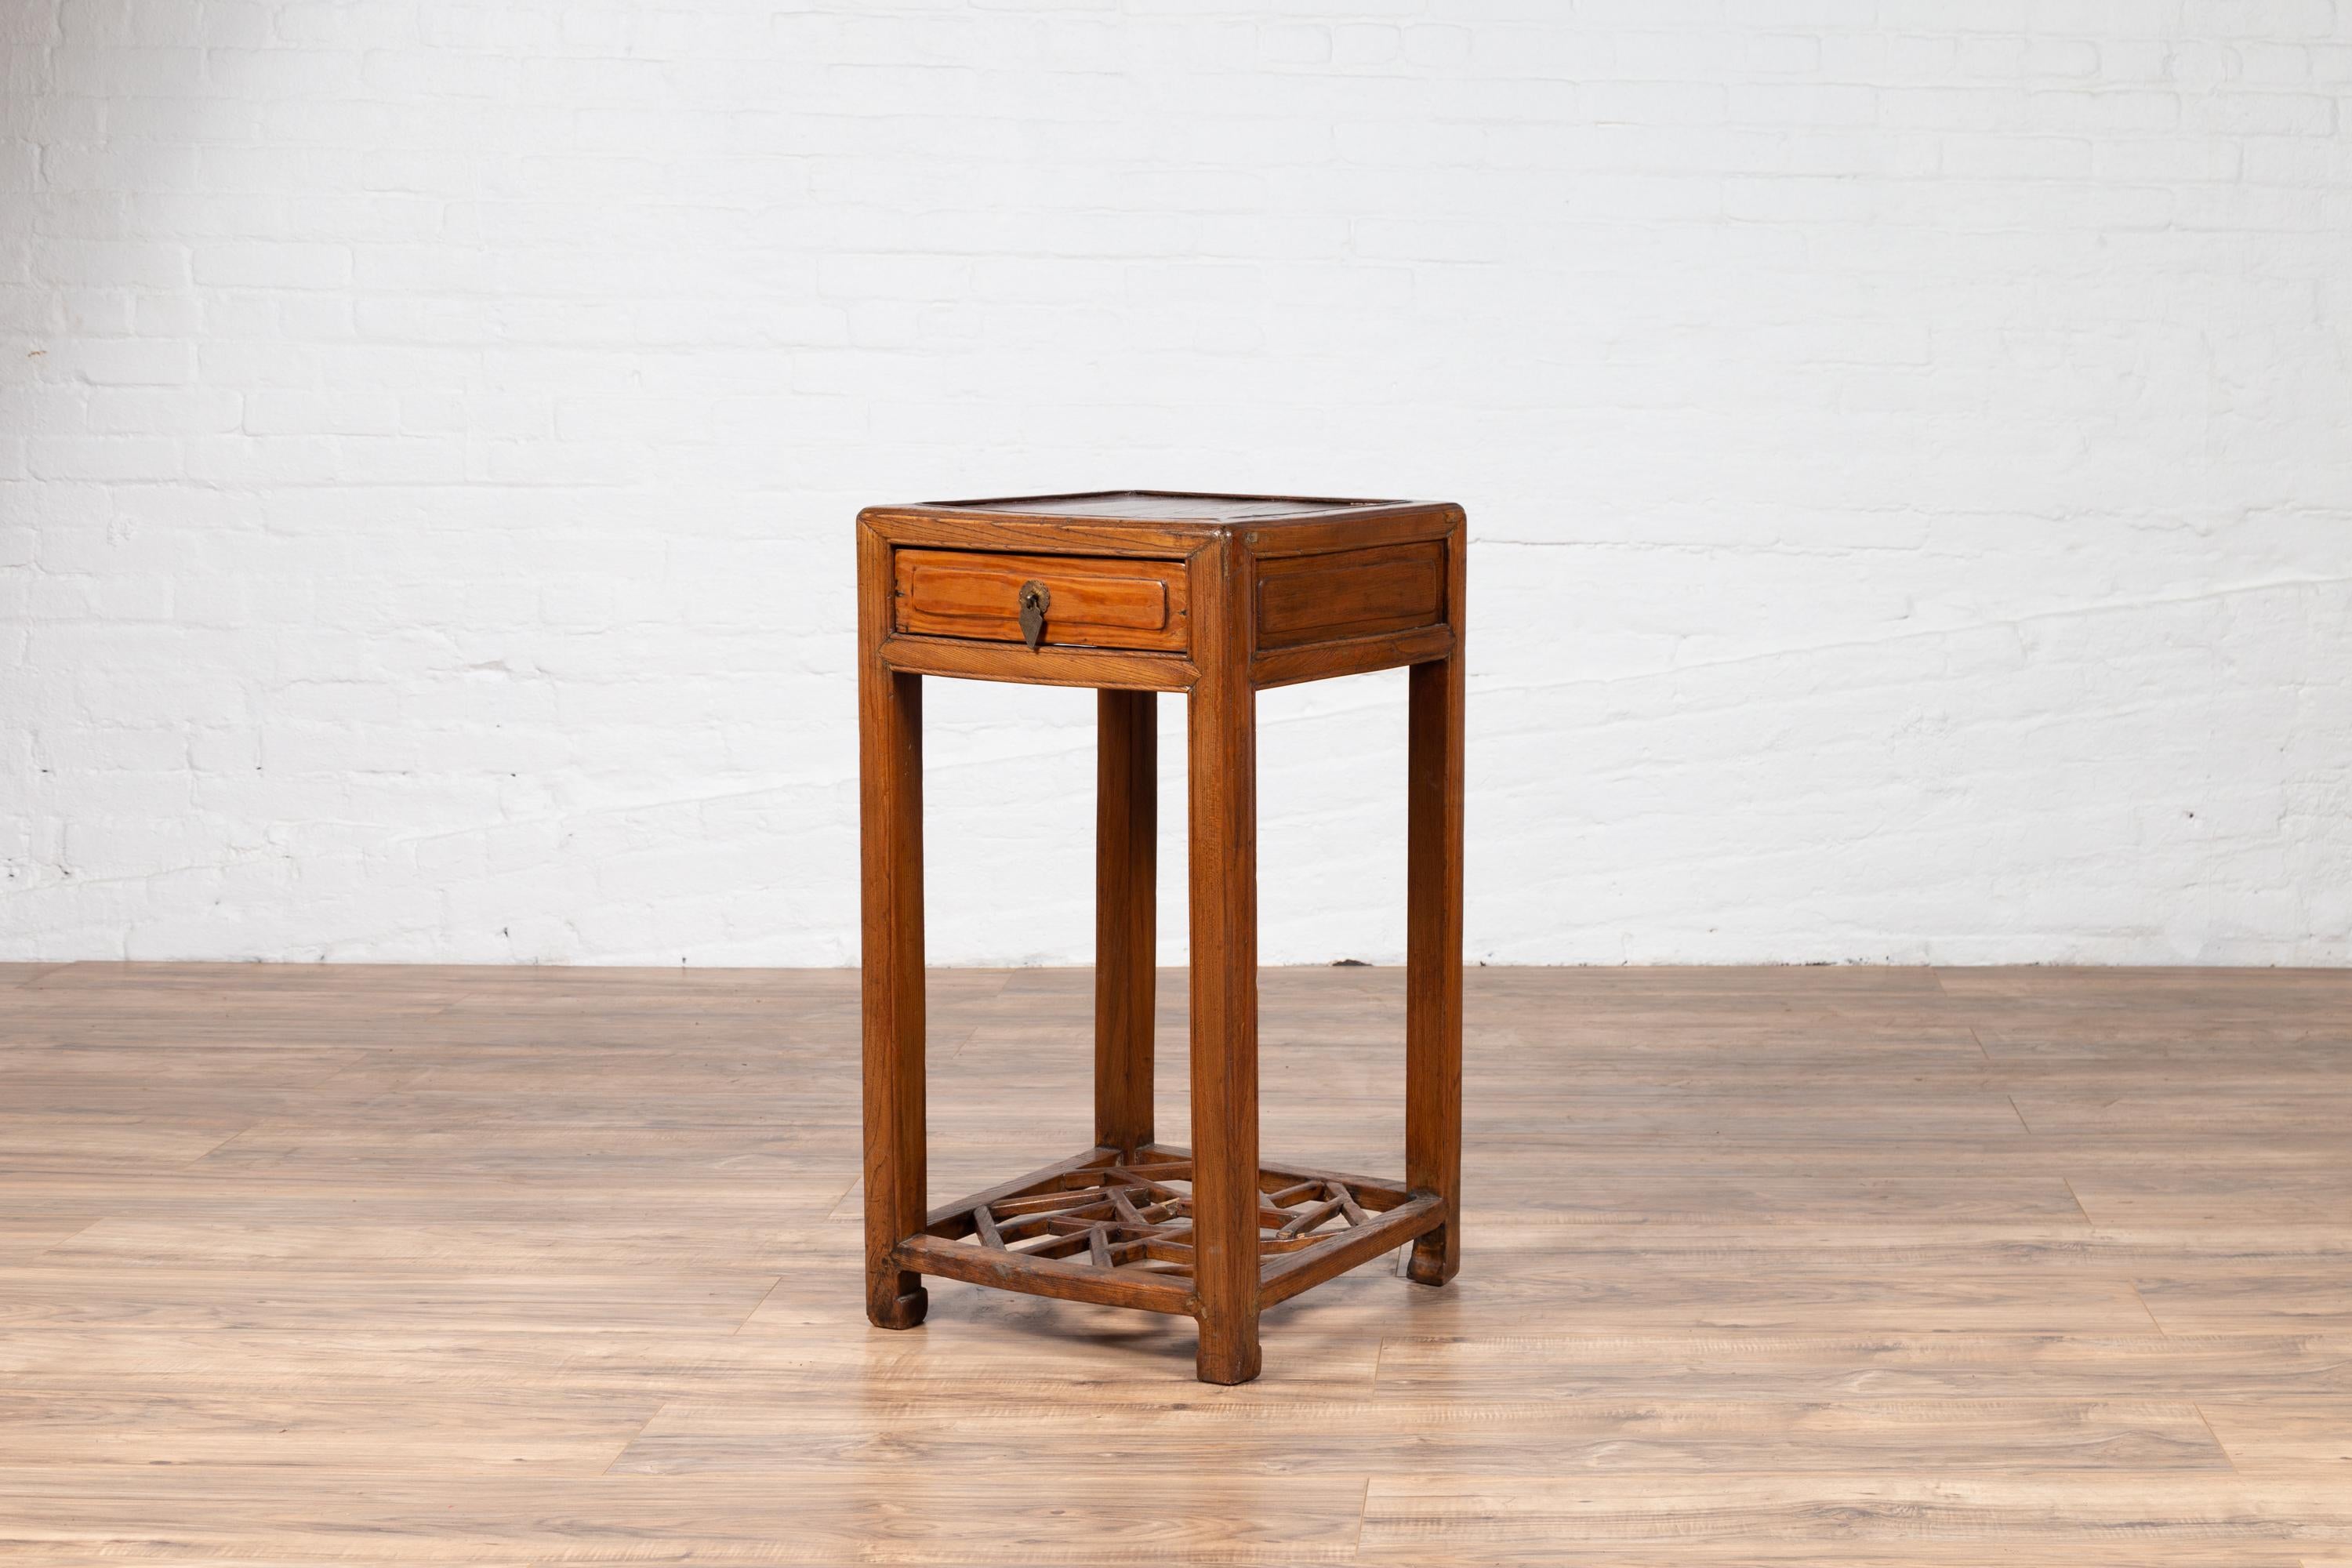 Elmwood Lamp Table with Single Drawer, Horsehoof Feet and Cracked Ice Shelf For Sale 4